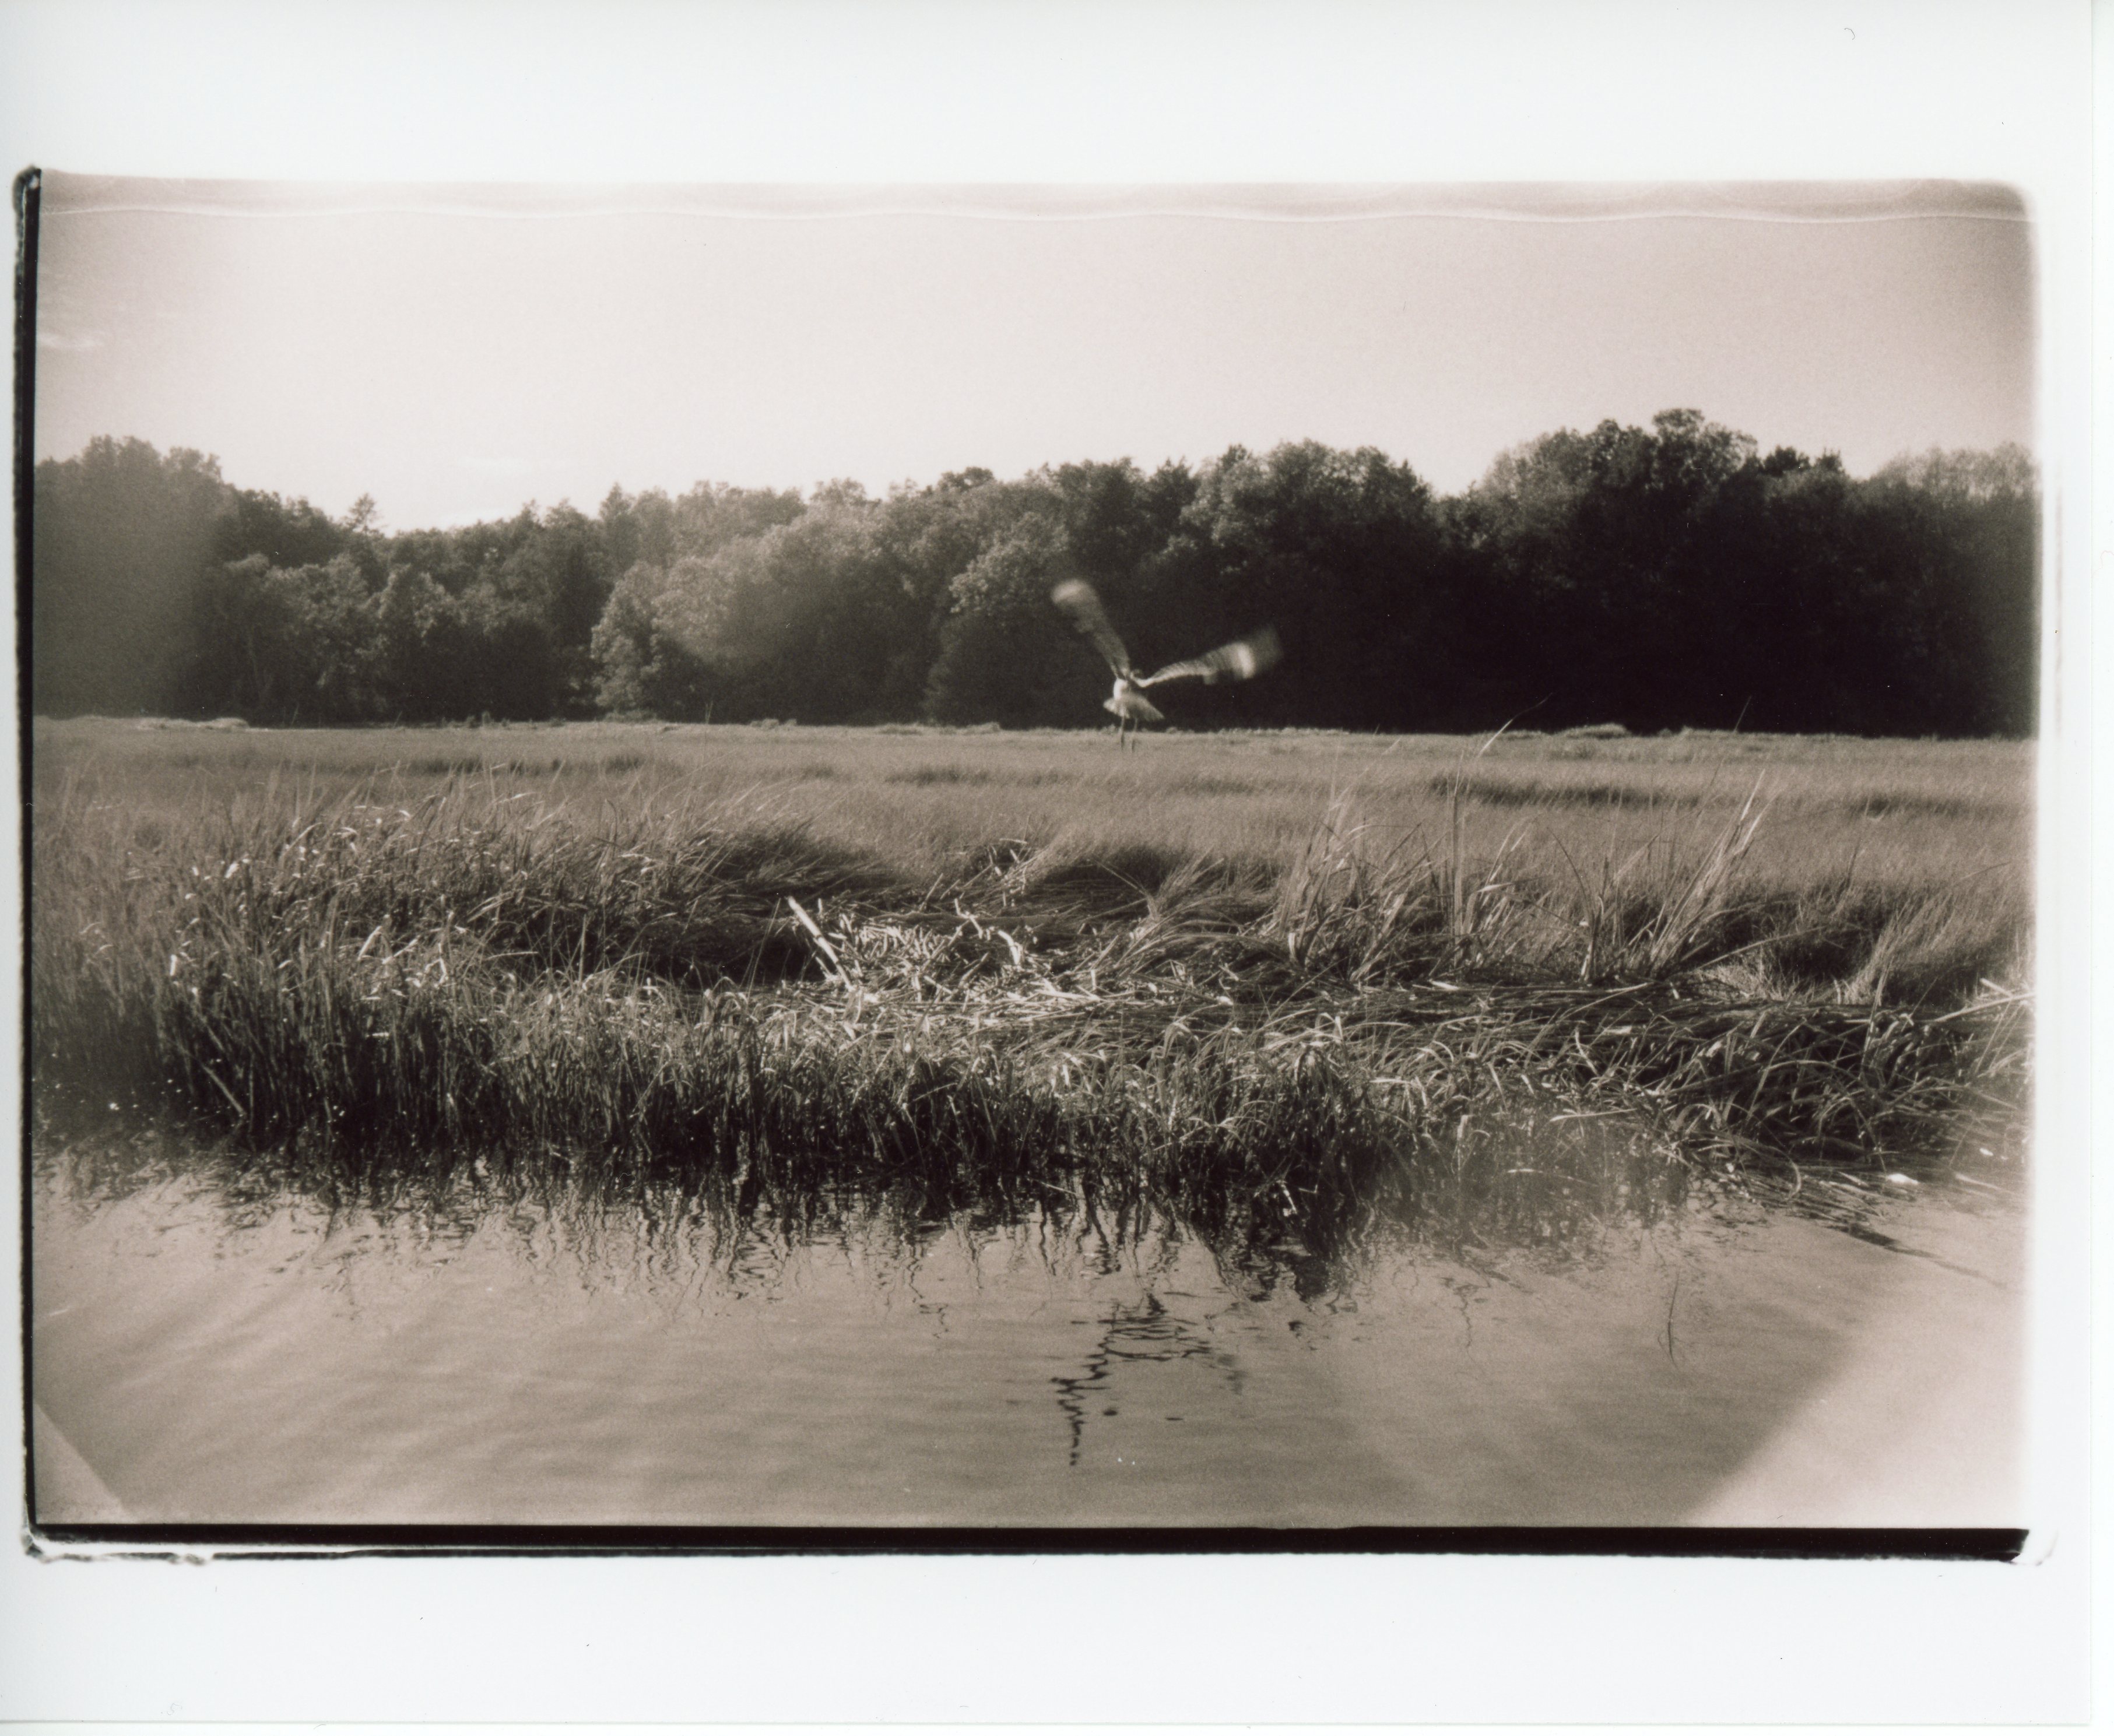 a black and white, sepia toned, 35mm print with messy edges the image shows a bird taking flight away from the camera in a sunny marsh; the image is divided roughly into fifths from top to bottom: clear sky, trees, marsh, tall grass, faintly rippled water